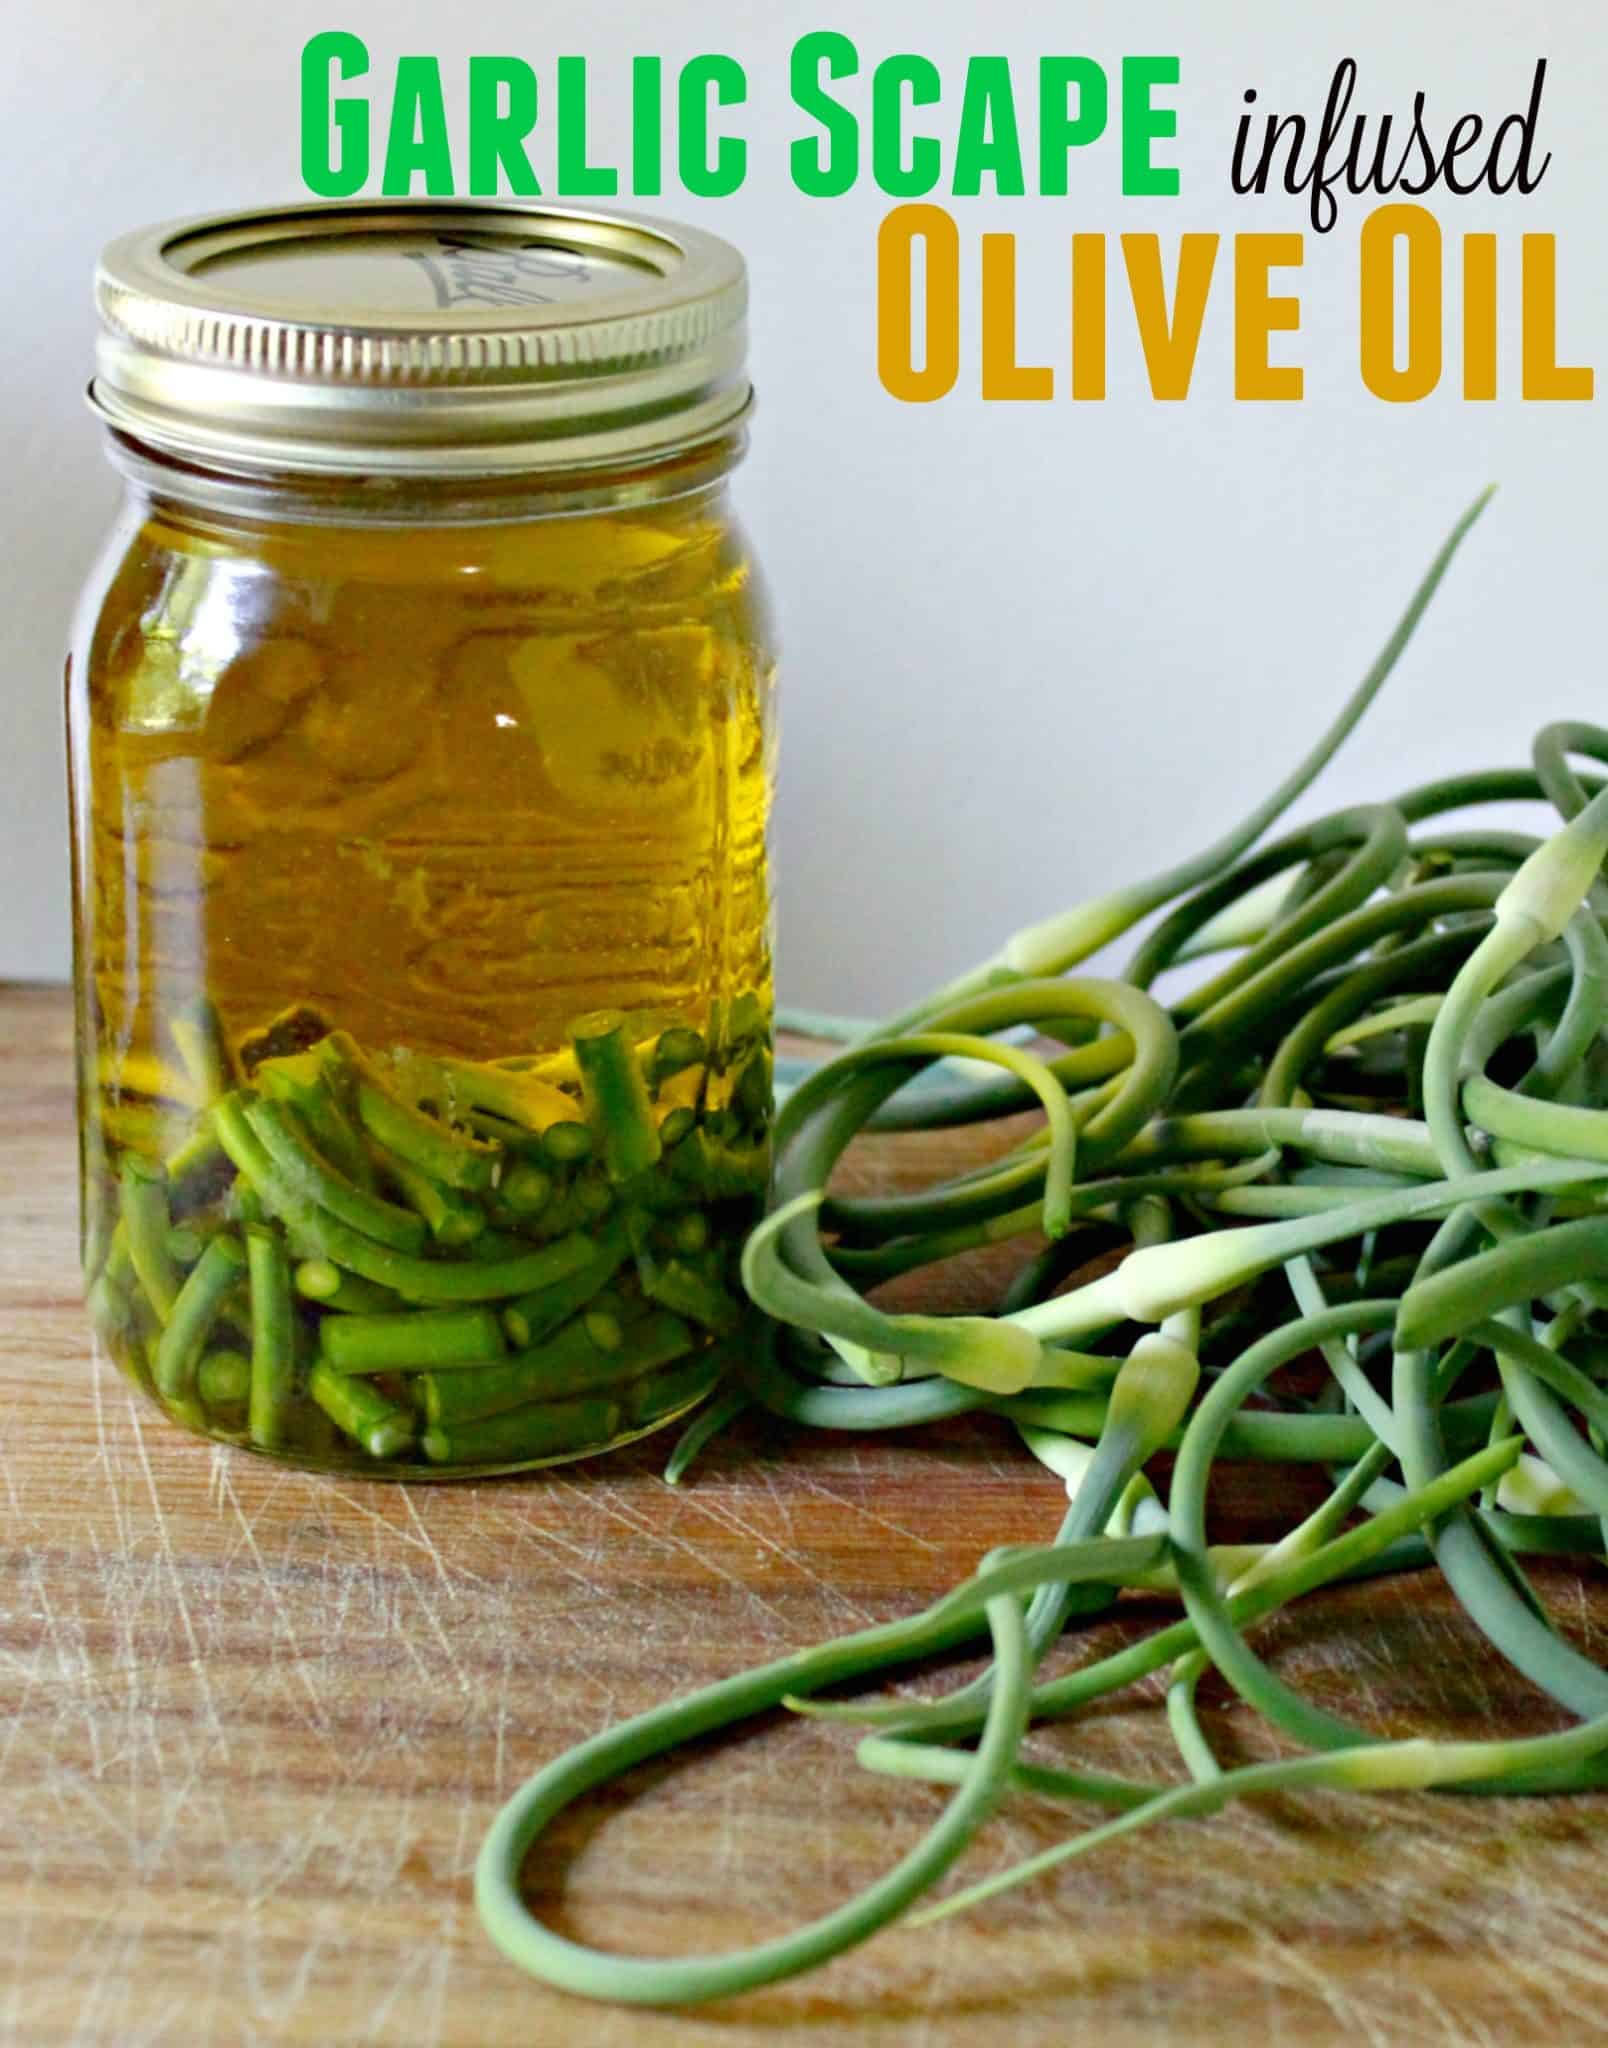 How to preserve garlic scapes - Garlic scape infused olive oil